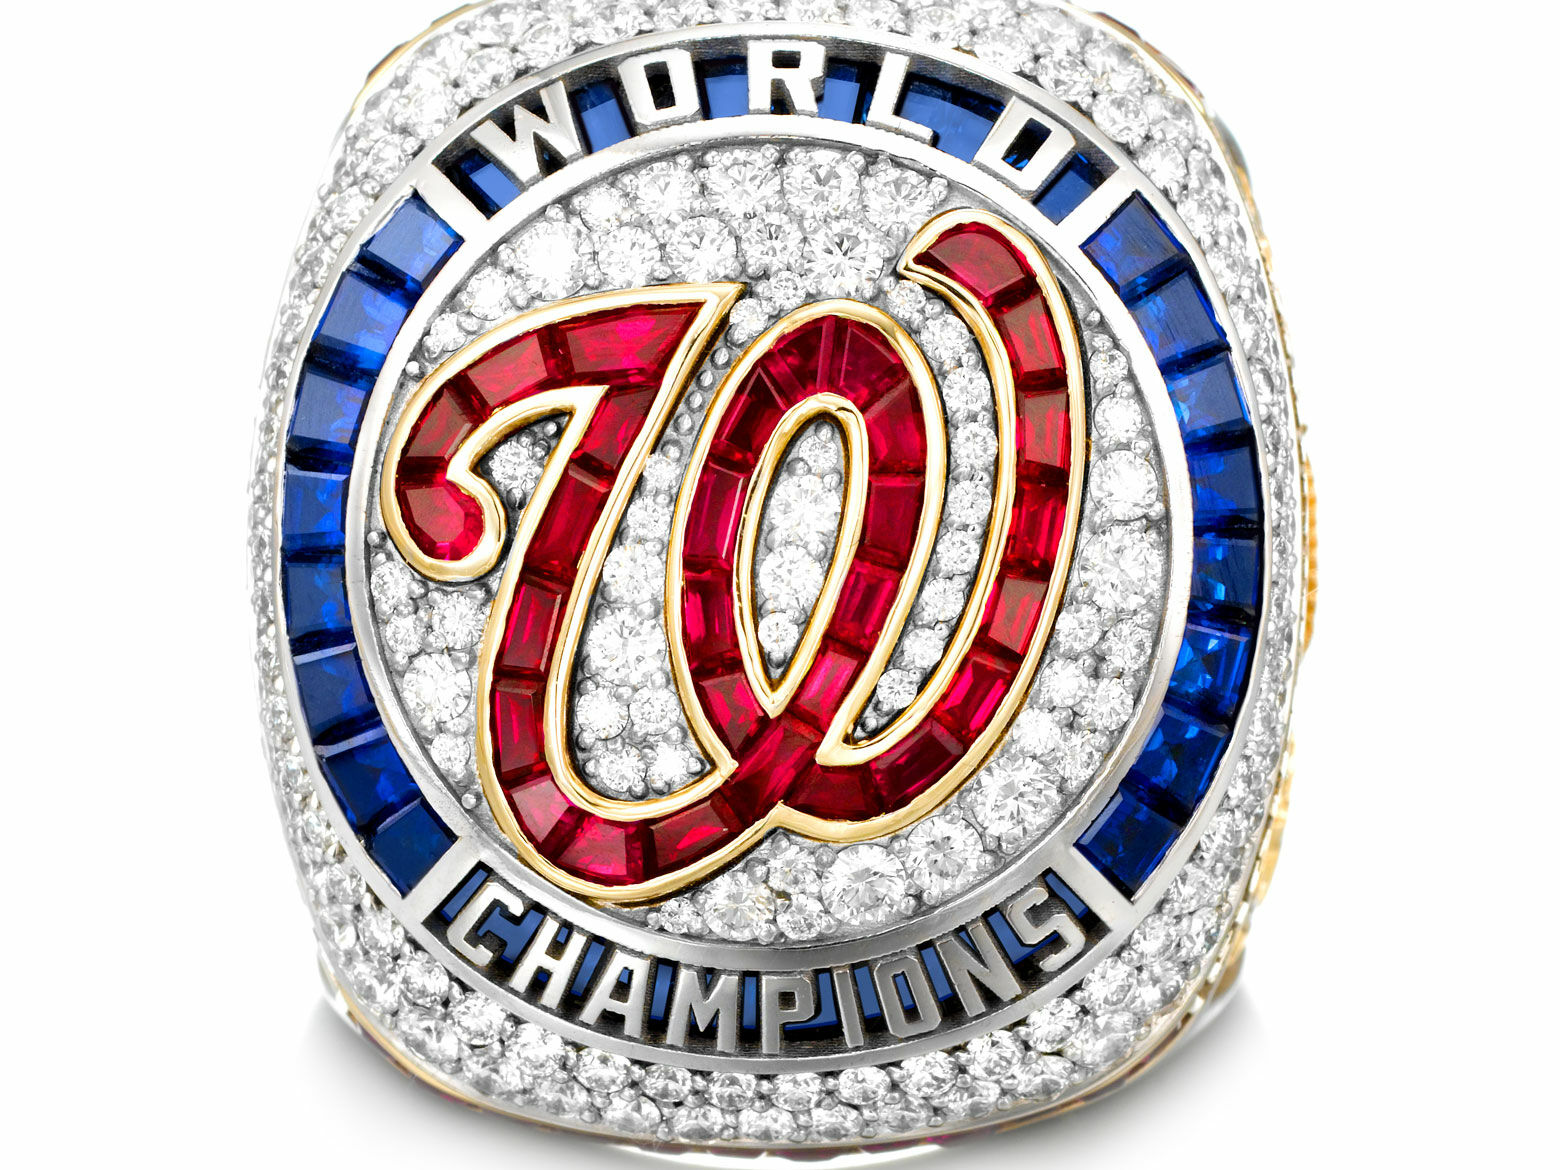 Nationals employees got our World Series rings today! I'm missing